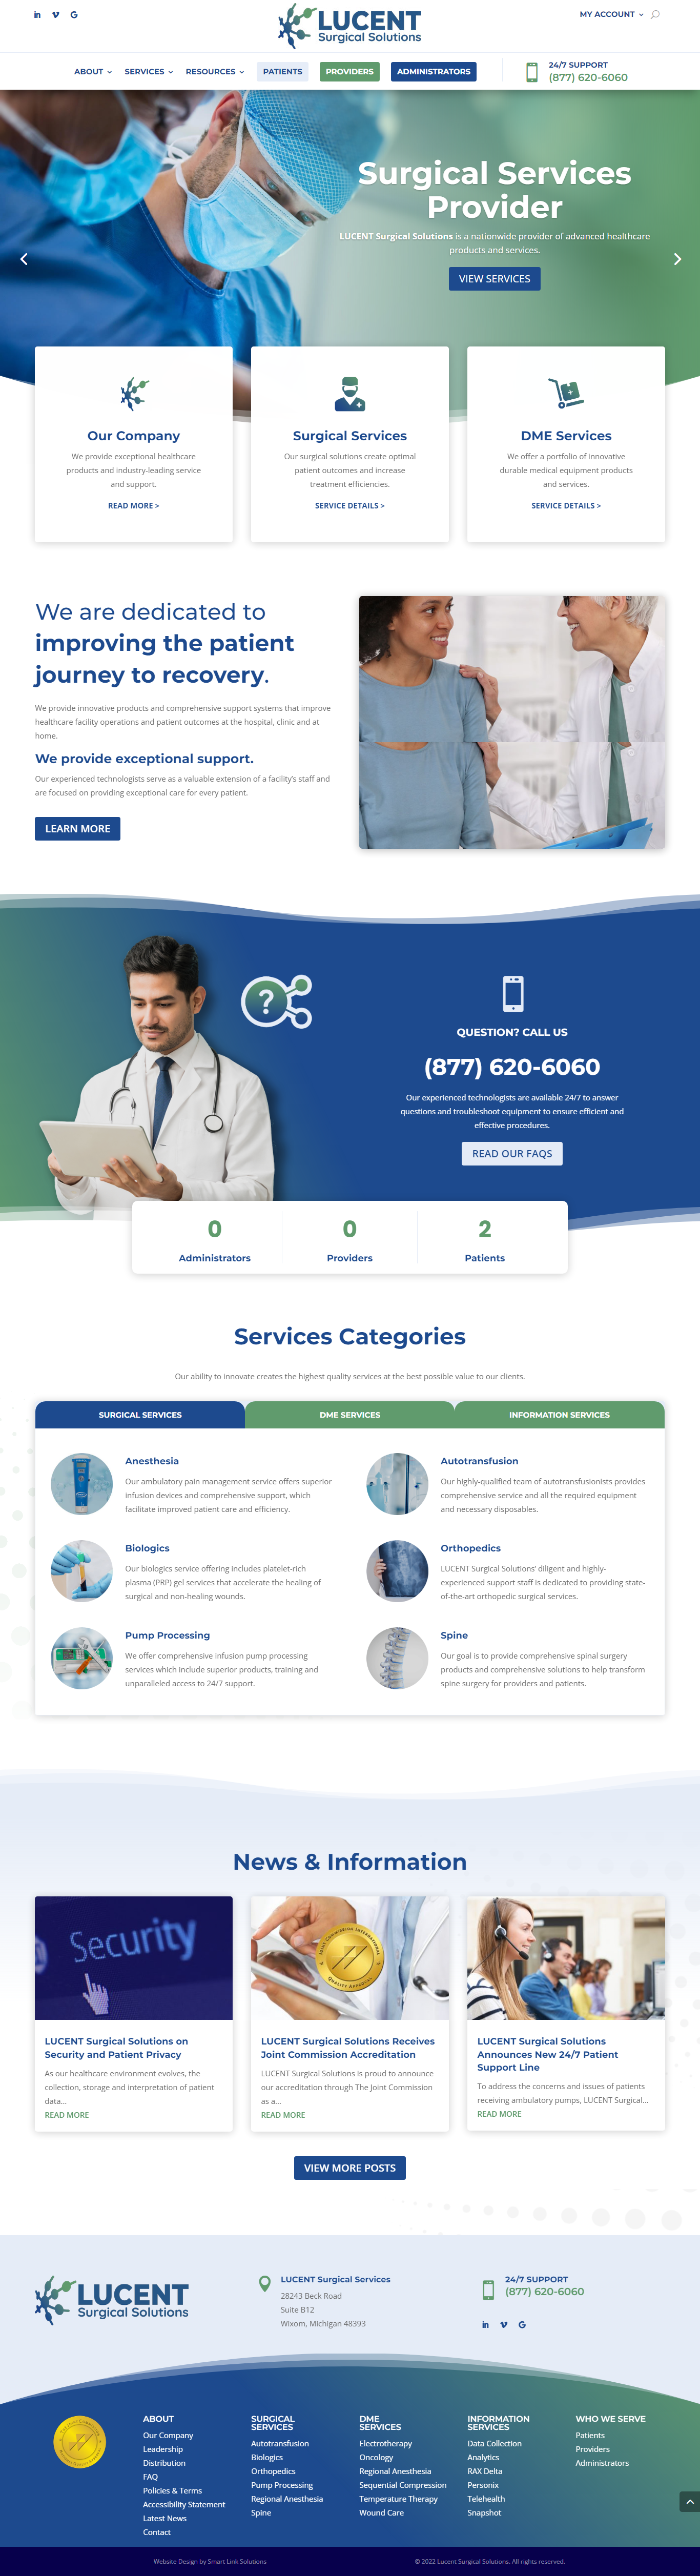 LUCENT Surgical Solutions Homepage Screenshot